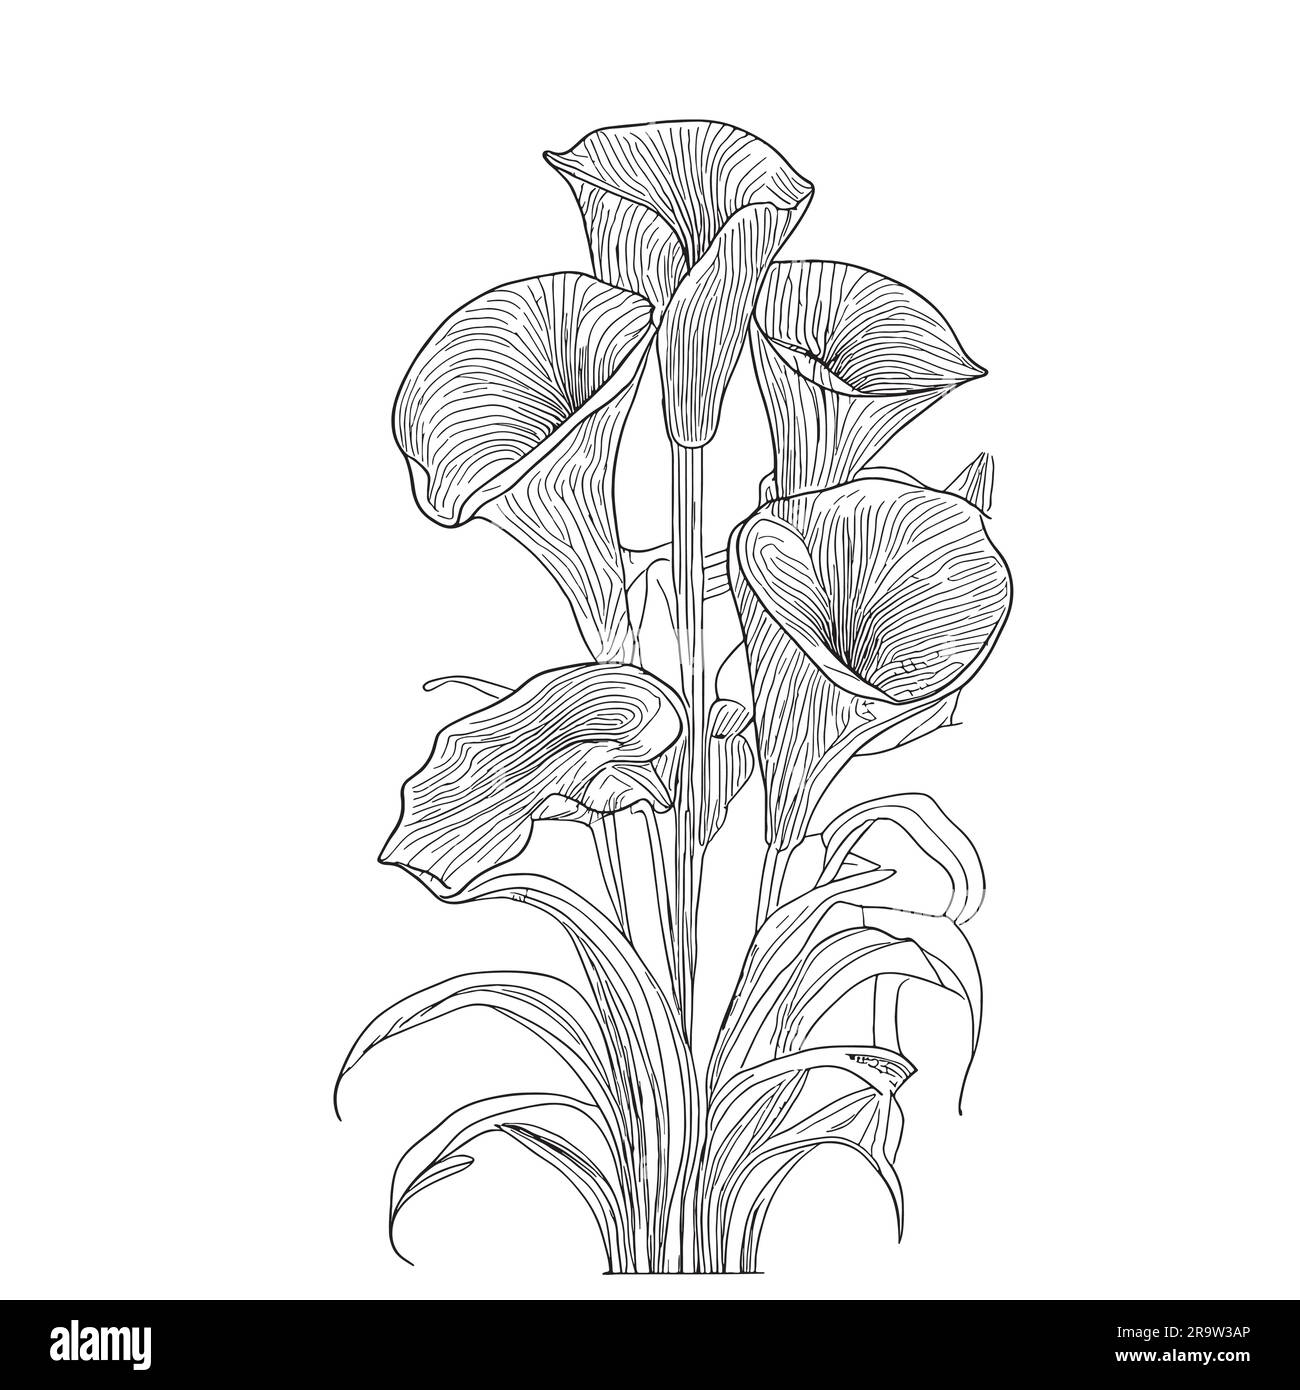 Calla lilies bouquet hand drawn sketch in doodle style illustration ...